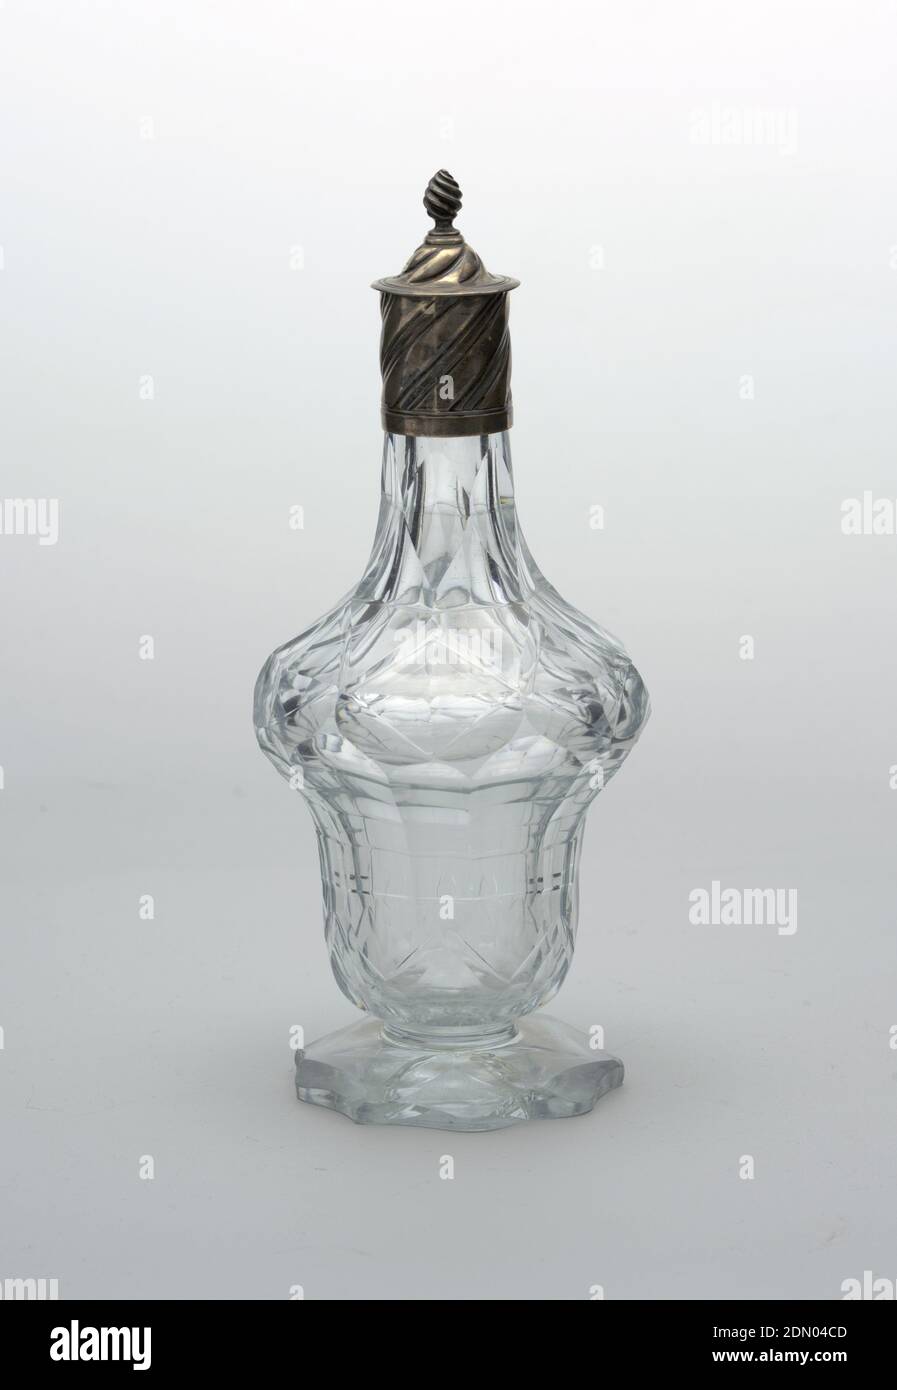 https://c8.alamy.com/comp/2DN04CD/covered-bottle-glass-silver-double-ogee-form-tall-neck-flat-circular-base-with-scalloped-edge-star-cut-on-bottom-body-cut-with-flat-geometric-patterns-silver-cover-with-straight-sides-conical-top-both-with-twisted-incised-lines-flame-finial-glass-has-blue-cast-england-17501800-glasswares-decorative-arts-bottle-bottle-2DN04CD.jpg